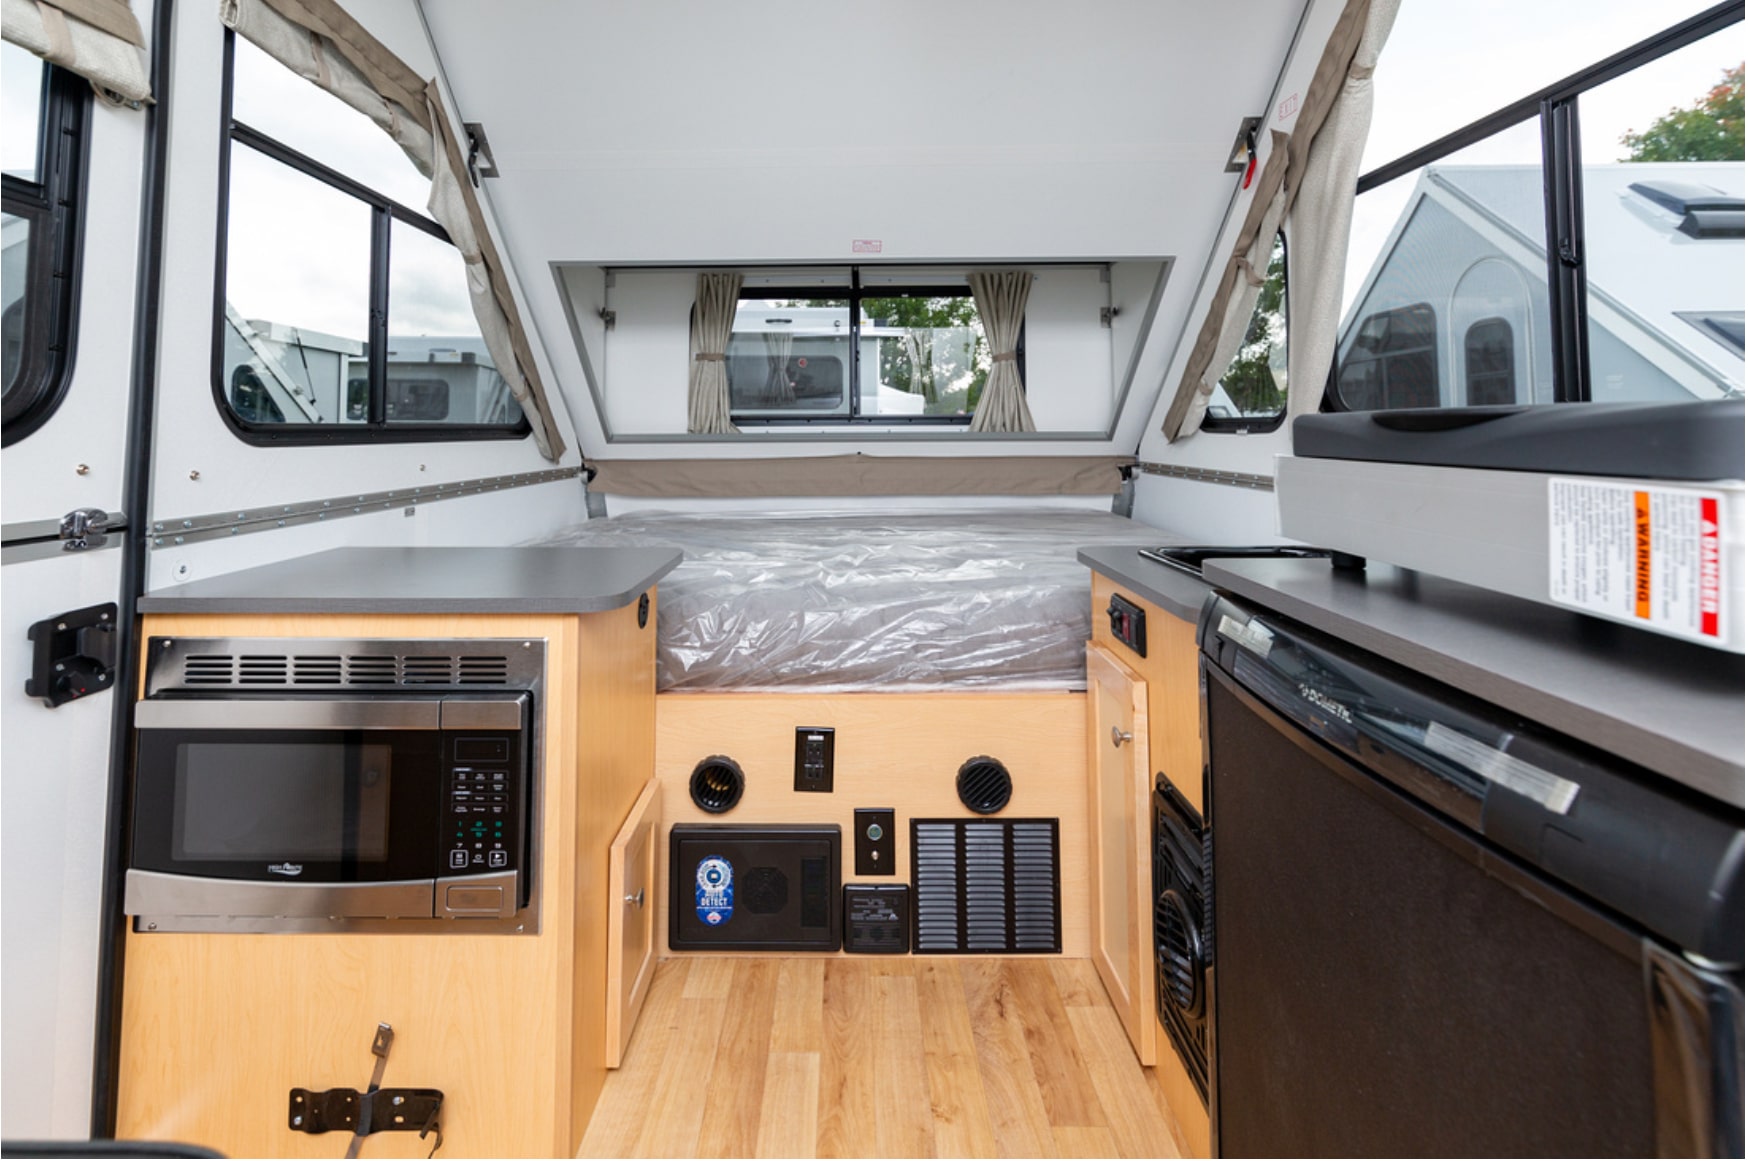 The interior of an rv with a microwave and sink.